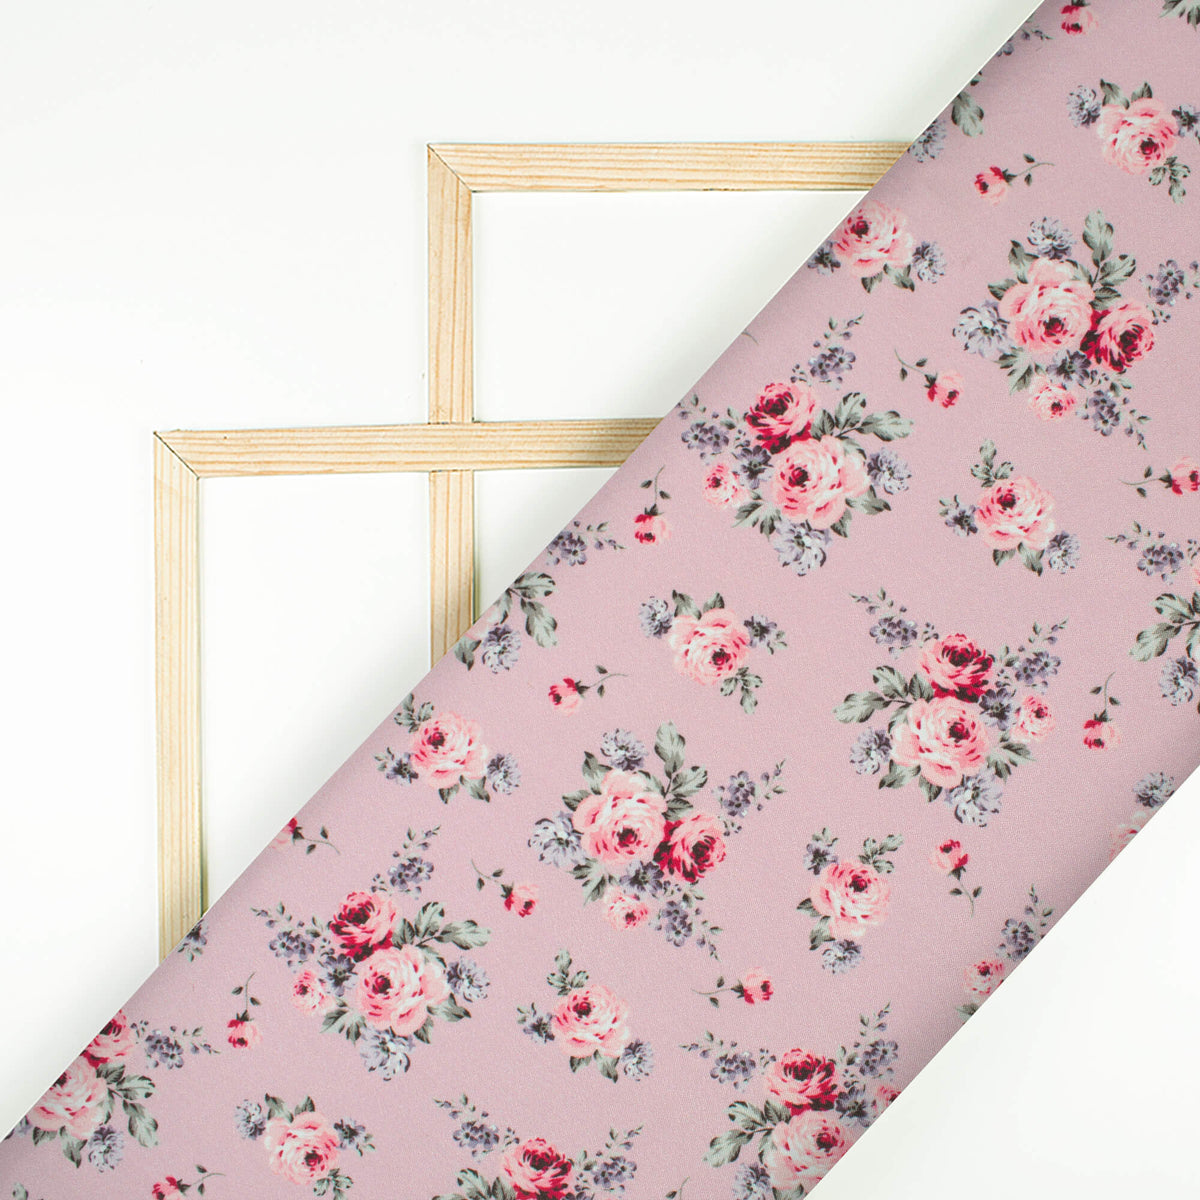 Baby Pink And Red Floral Pattern Digital Print Crepe Silk Fabric